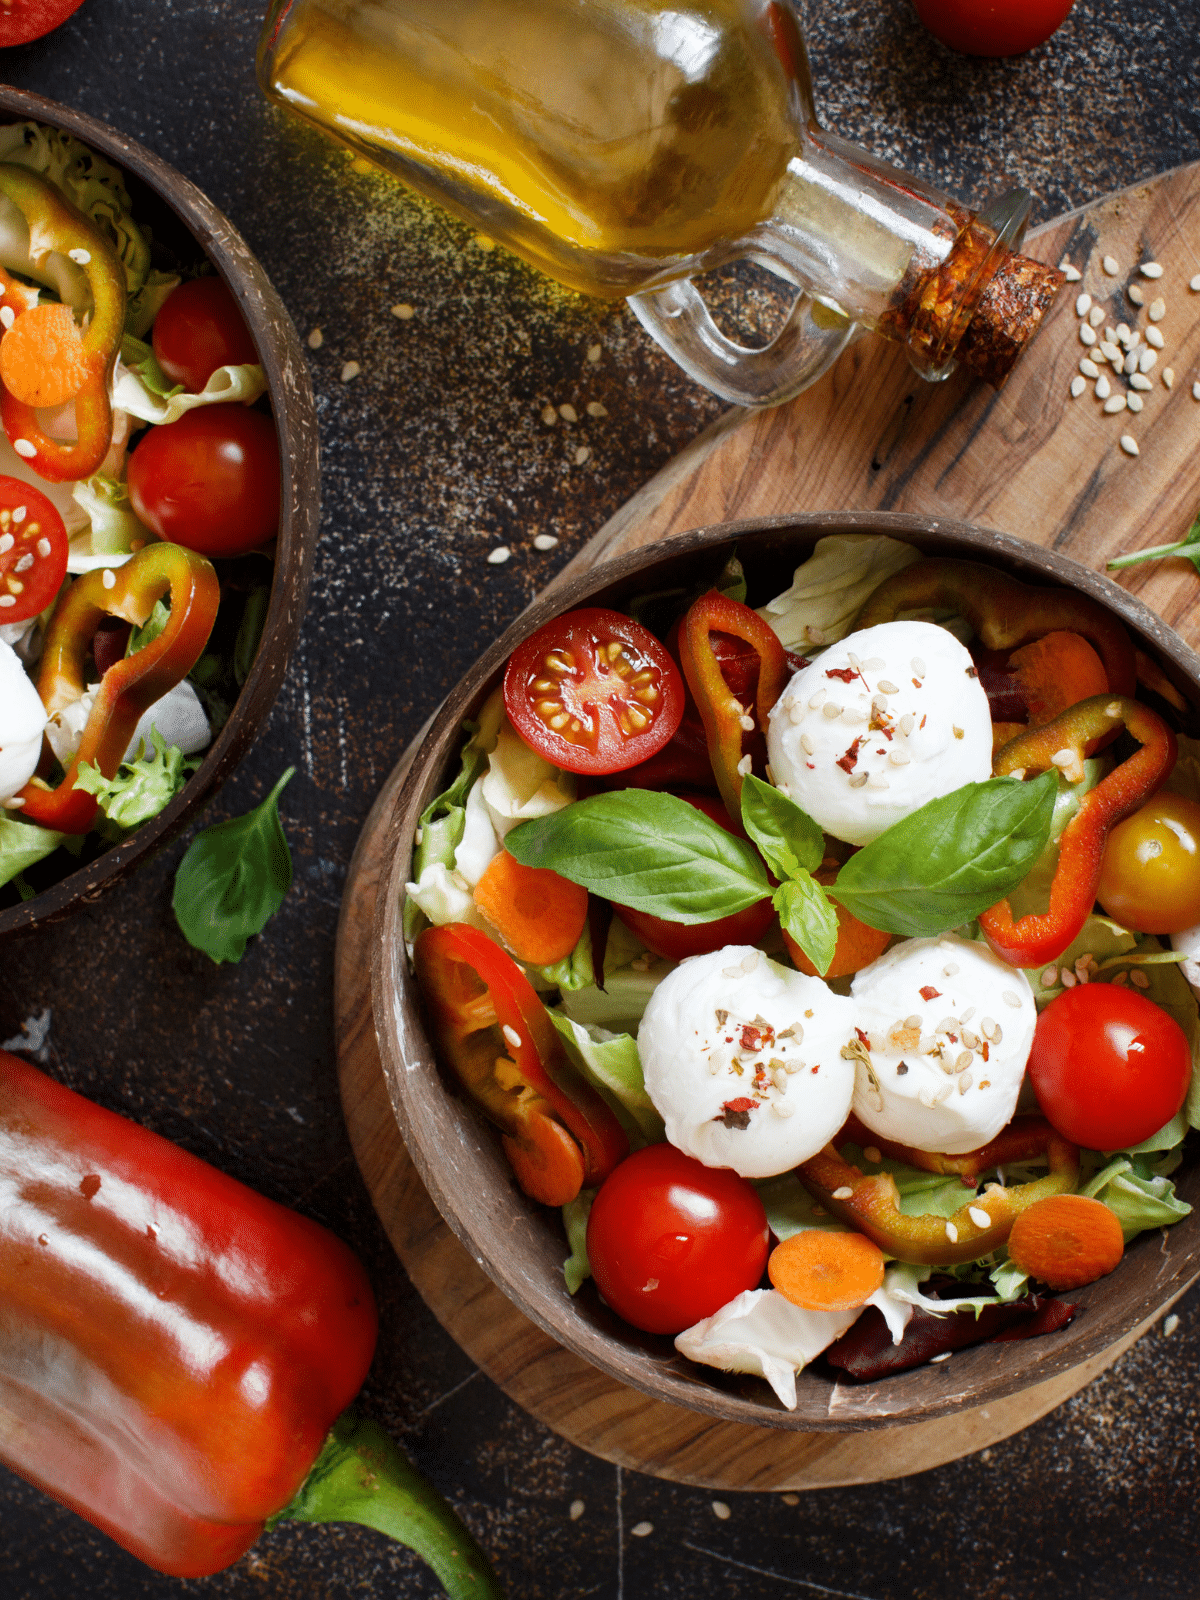 Two bowls of salad with mozzarella and tomatoes in a wooden bowl.